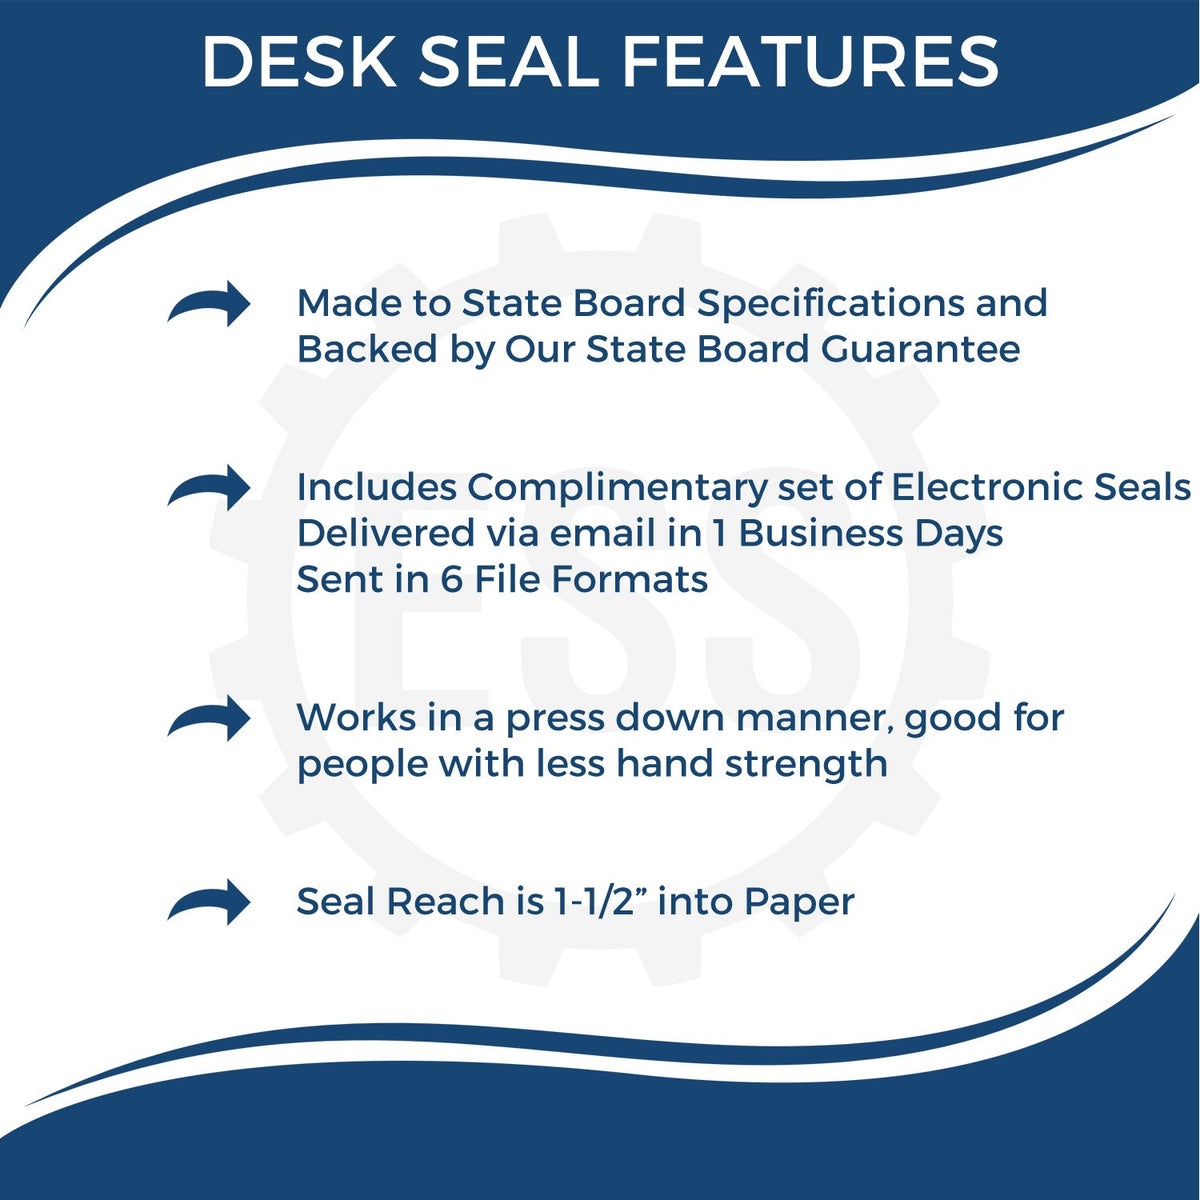 A picture of an infographic highlighting the selling points for the Iowa Desk Surveyor Seal Embosser